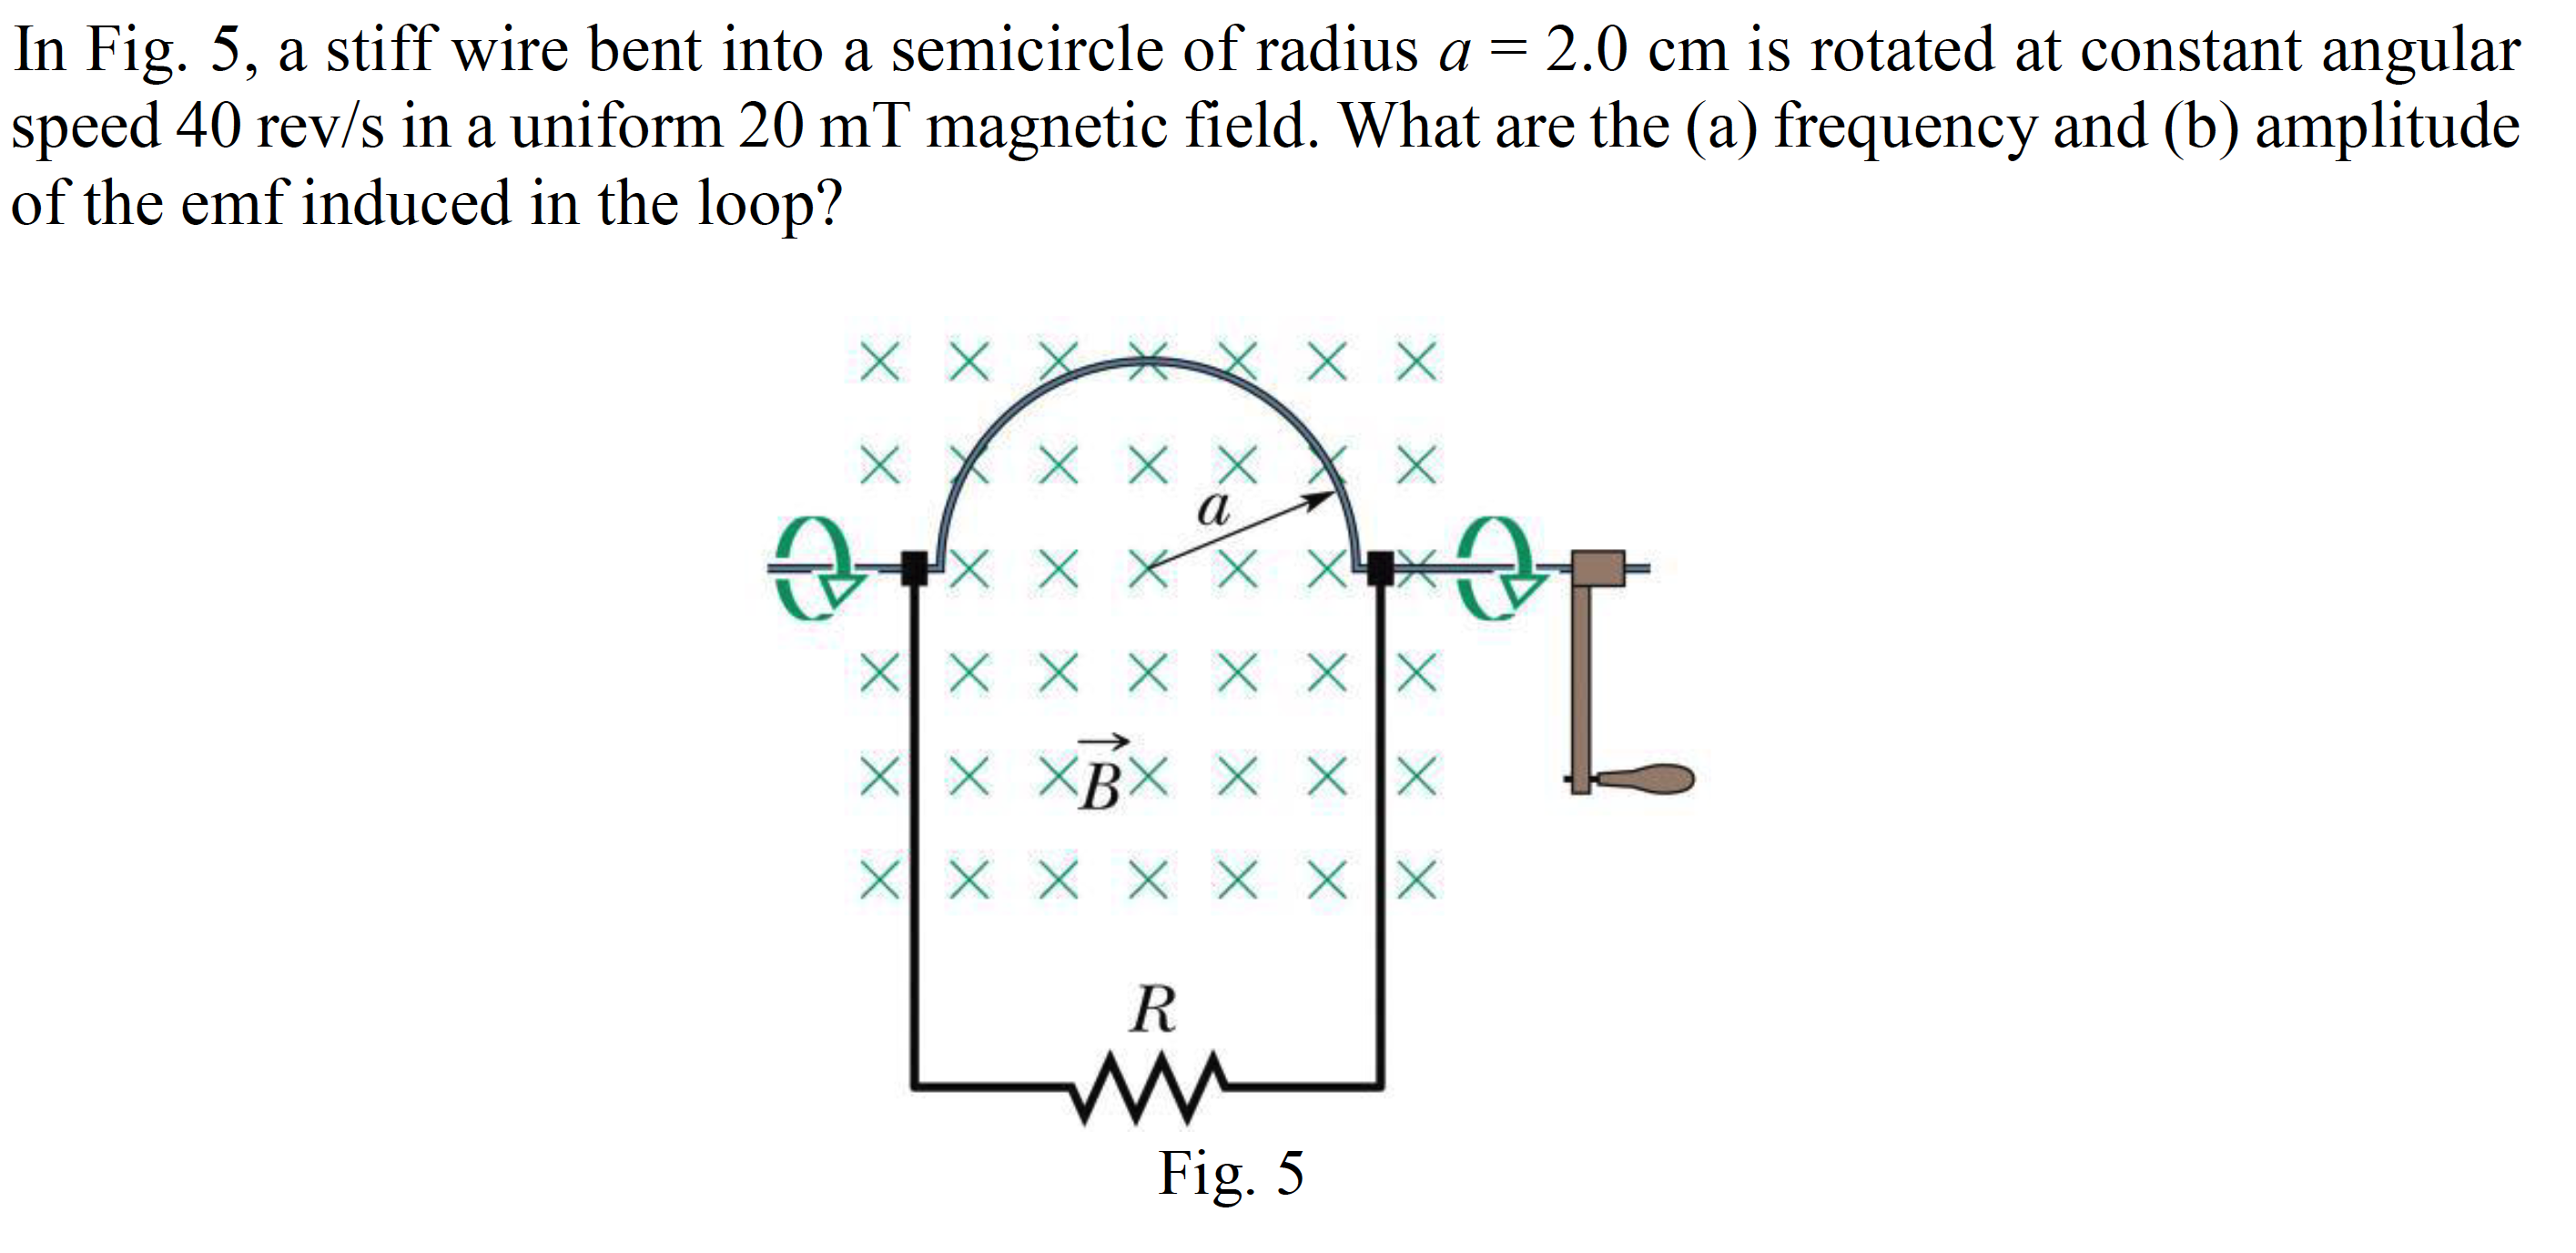 In Fig. 5, a stiff wire bent into a semicircle of radius a = 2.0 cm is rotated at constant angular
speed 40 rev/s in a uniform 20 mT magnetic field. What are the (a) frequency and (b) amplitude
of the emf induced in the loop?
XX X X X XX
XX XBX X XX
XX X X X X
R
Fig. 5
